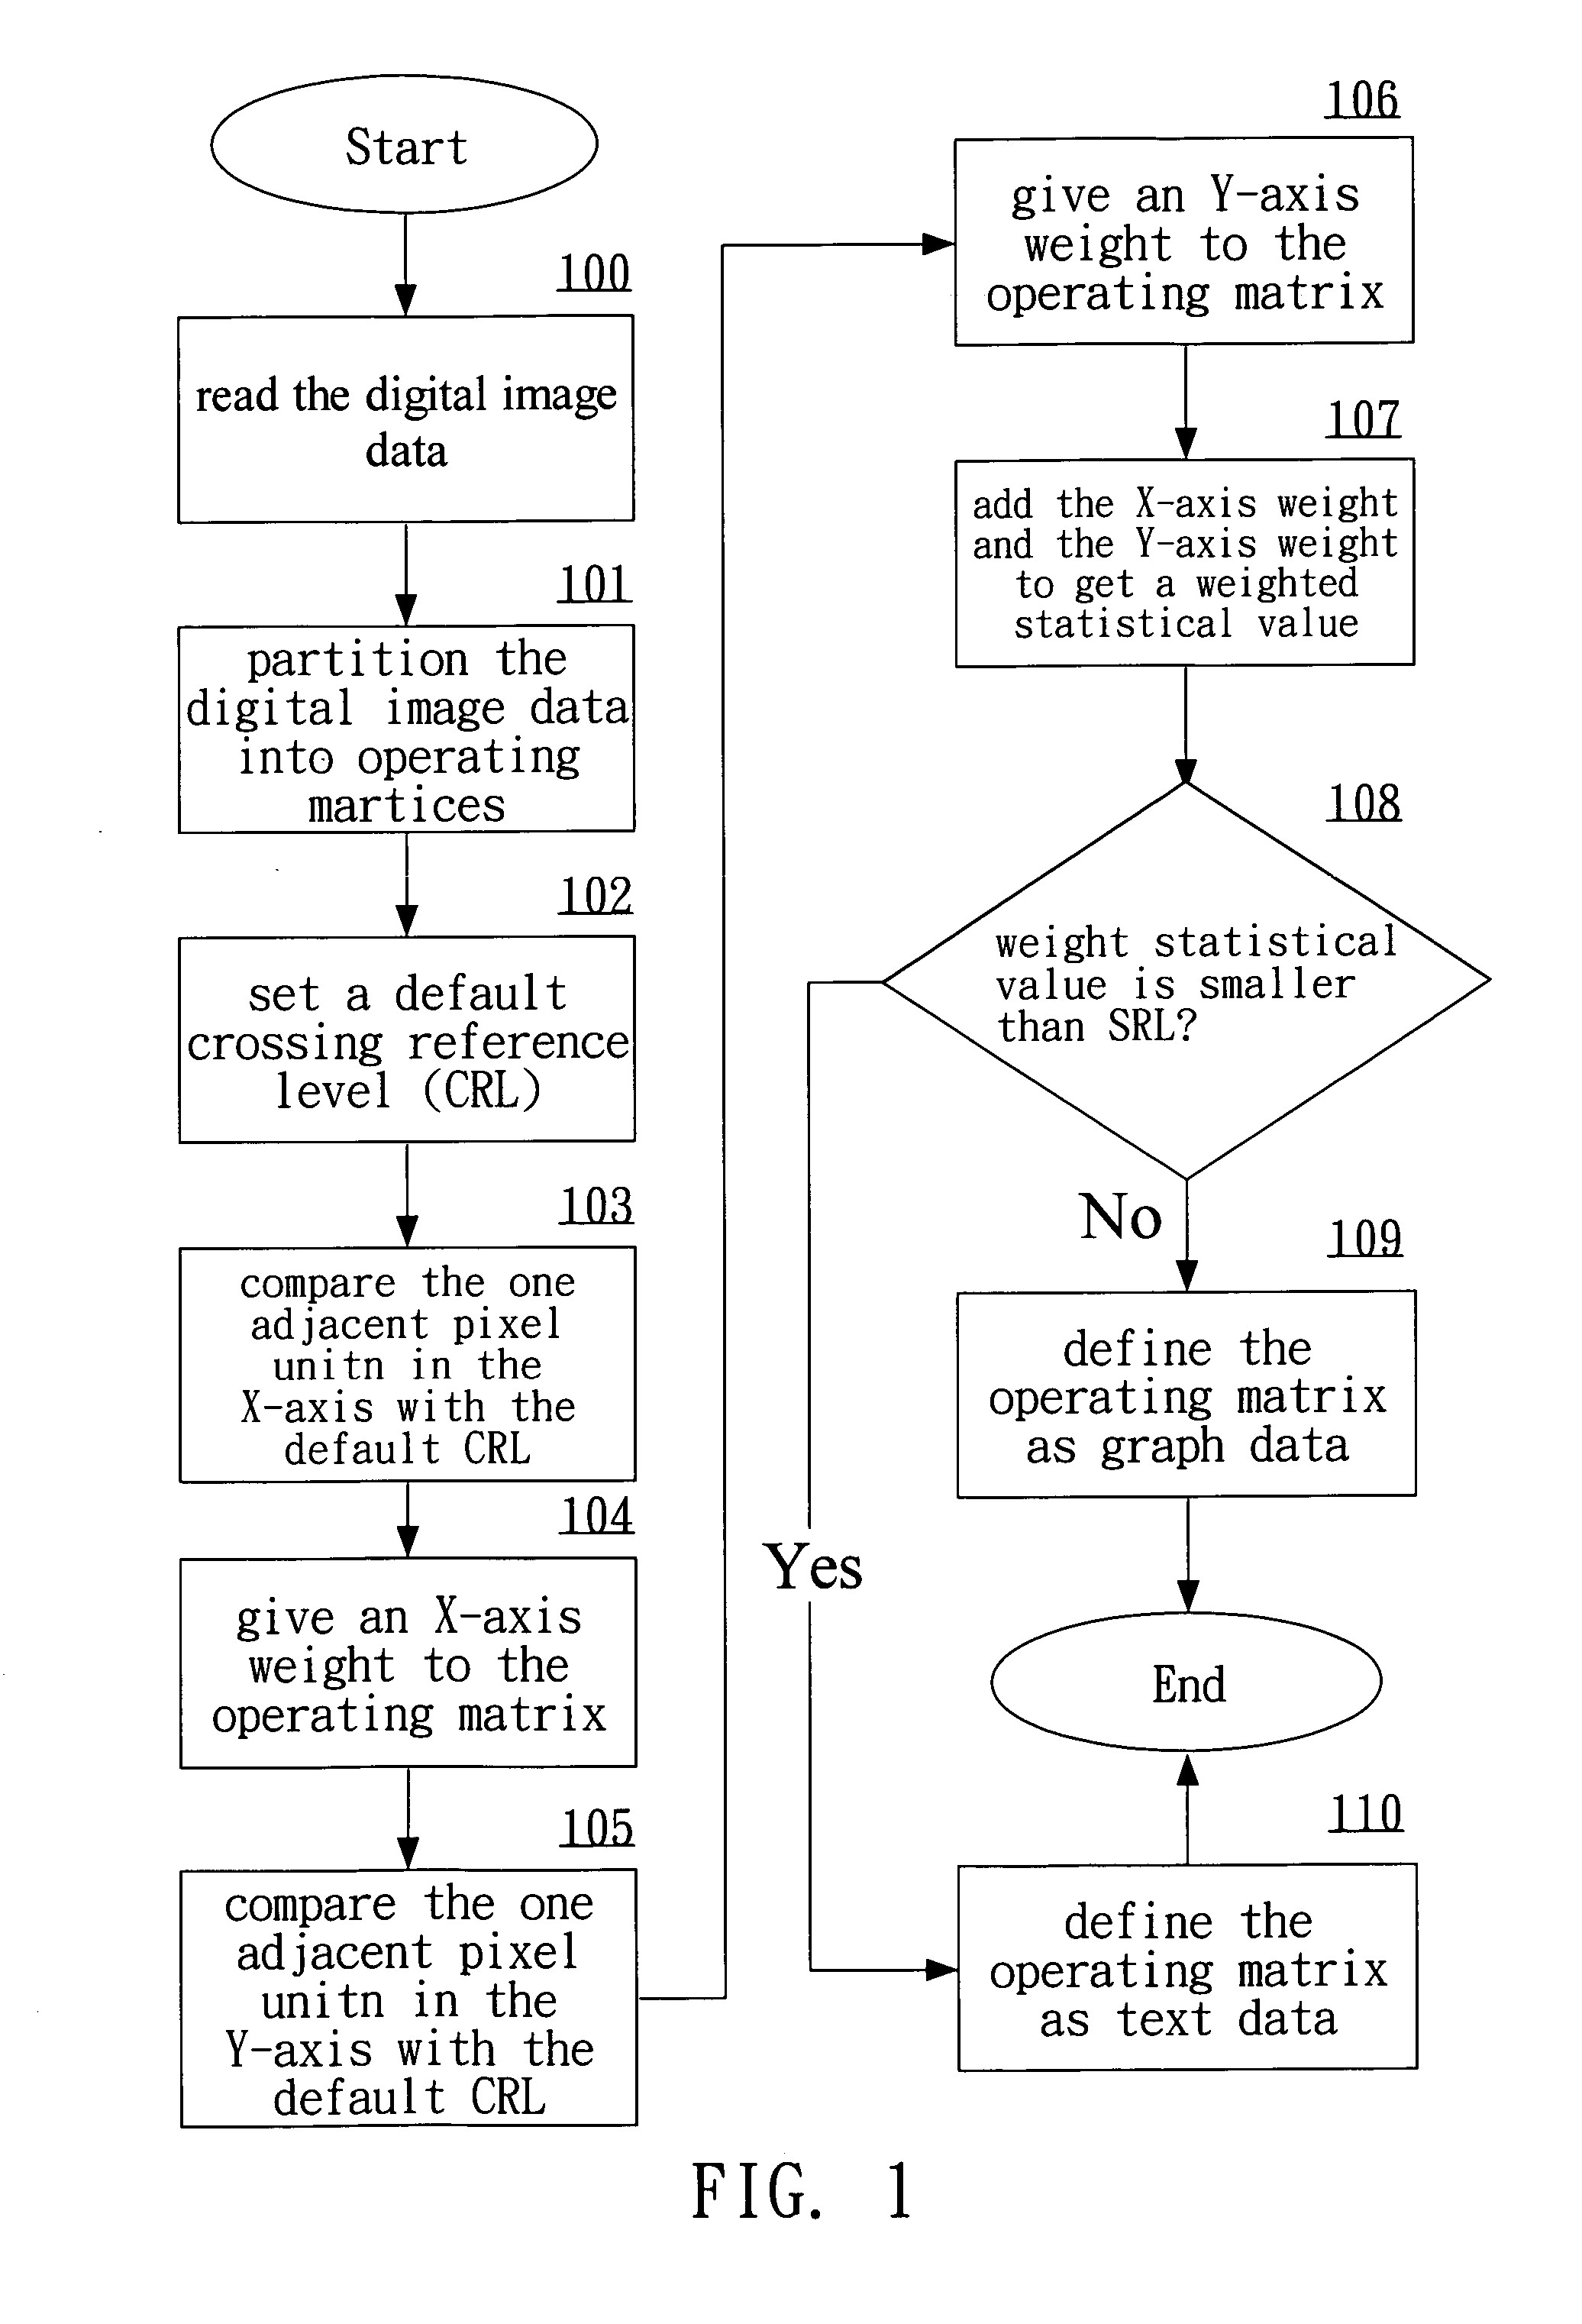 Method of separating text and graphs in digital image data